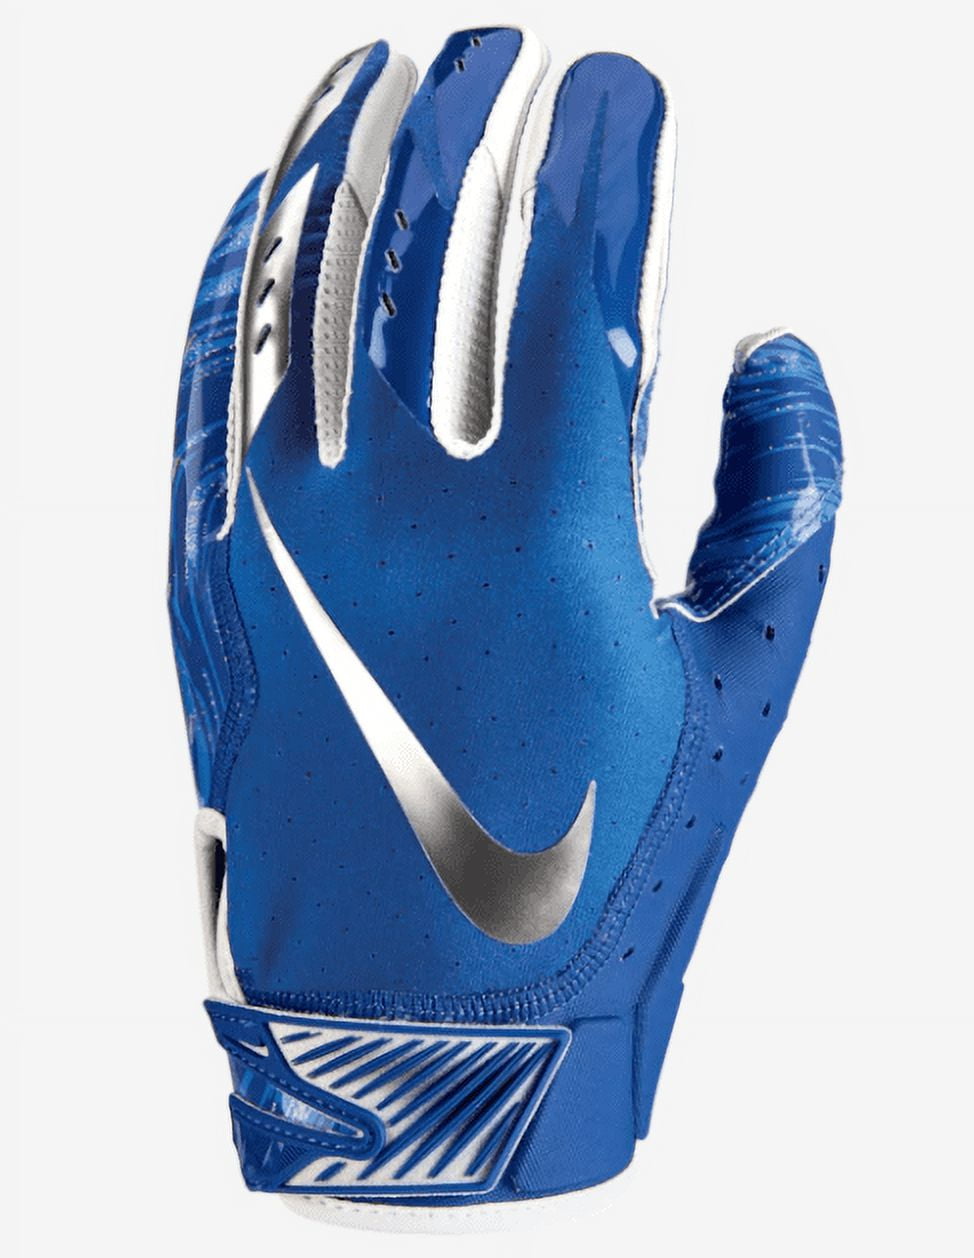 BRAND NEW Nike Vapor Jet 5.0 Receiver Gloves - ADULT & YOUTH SIZES